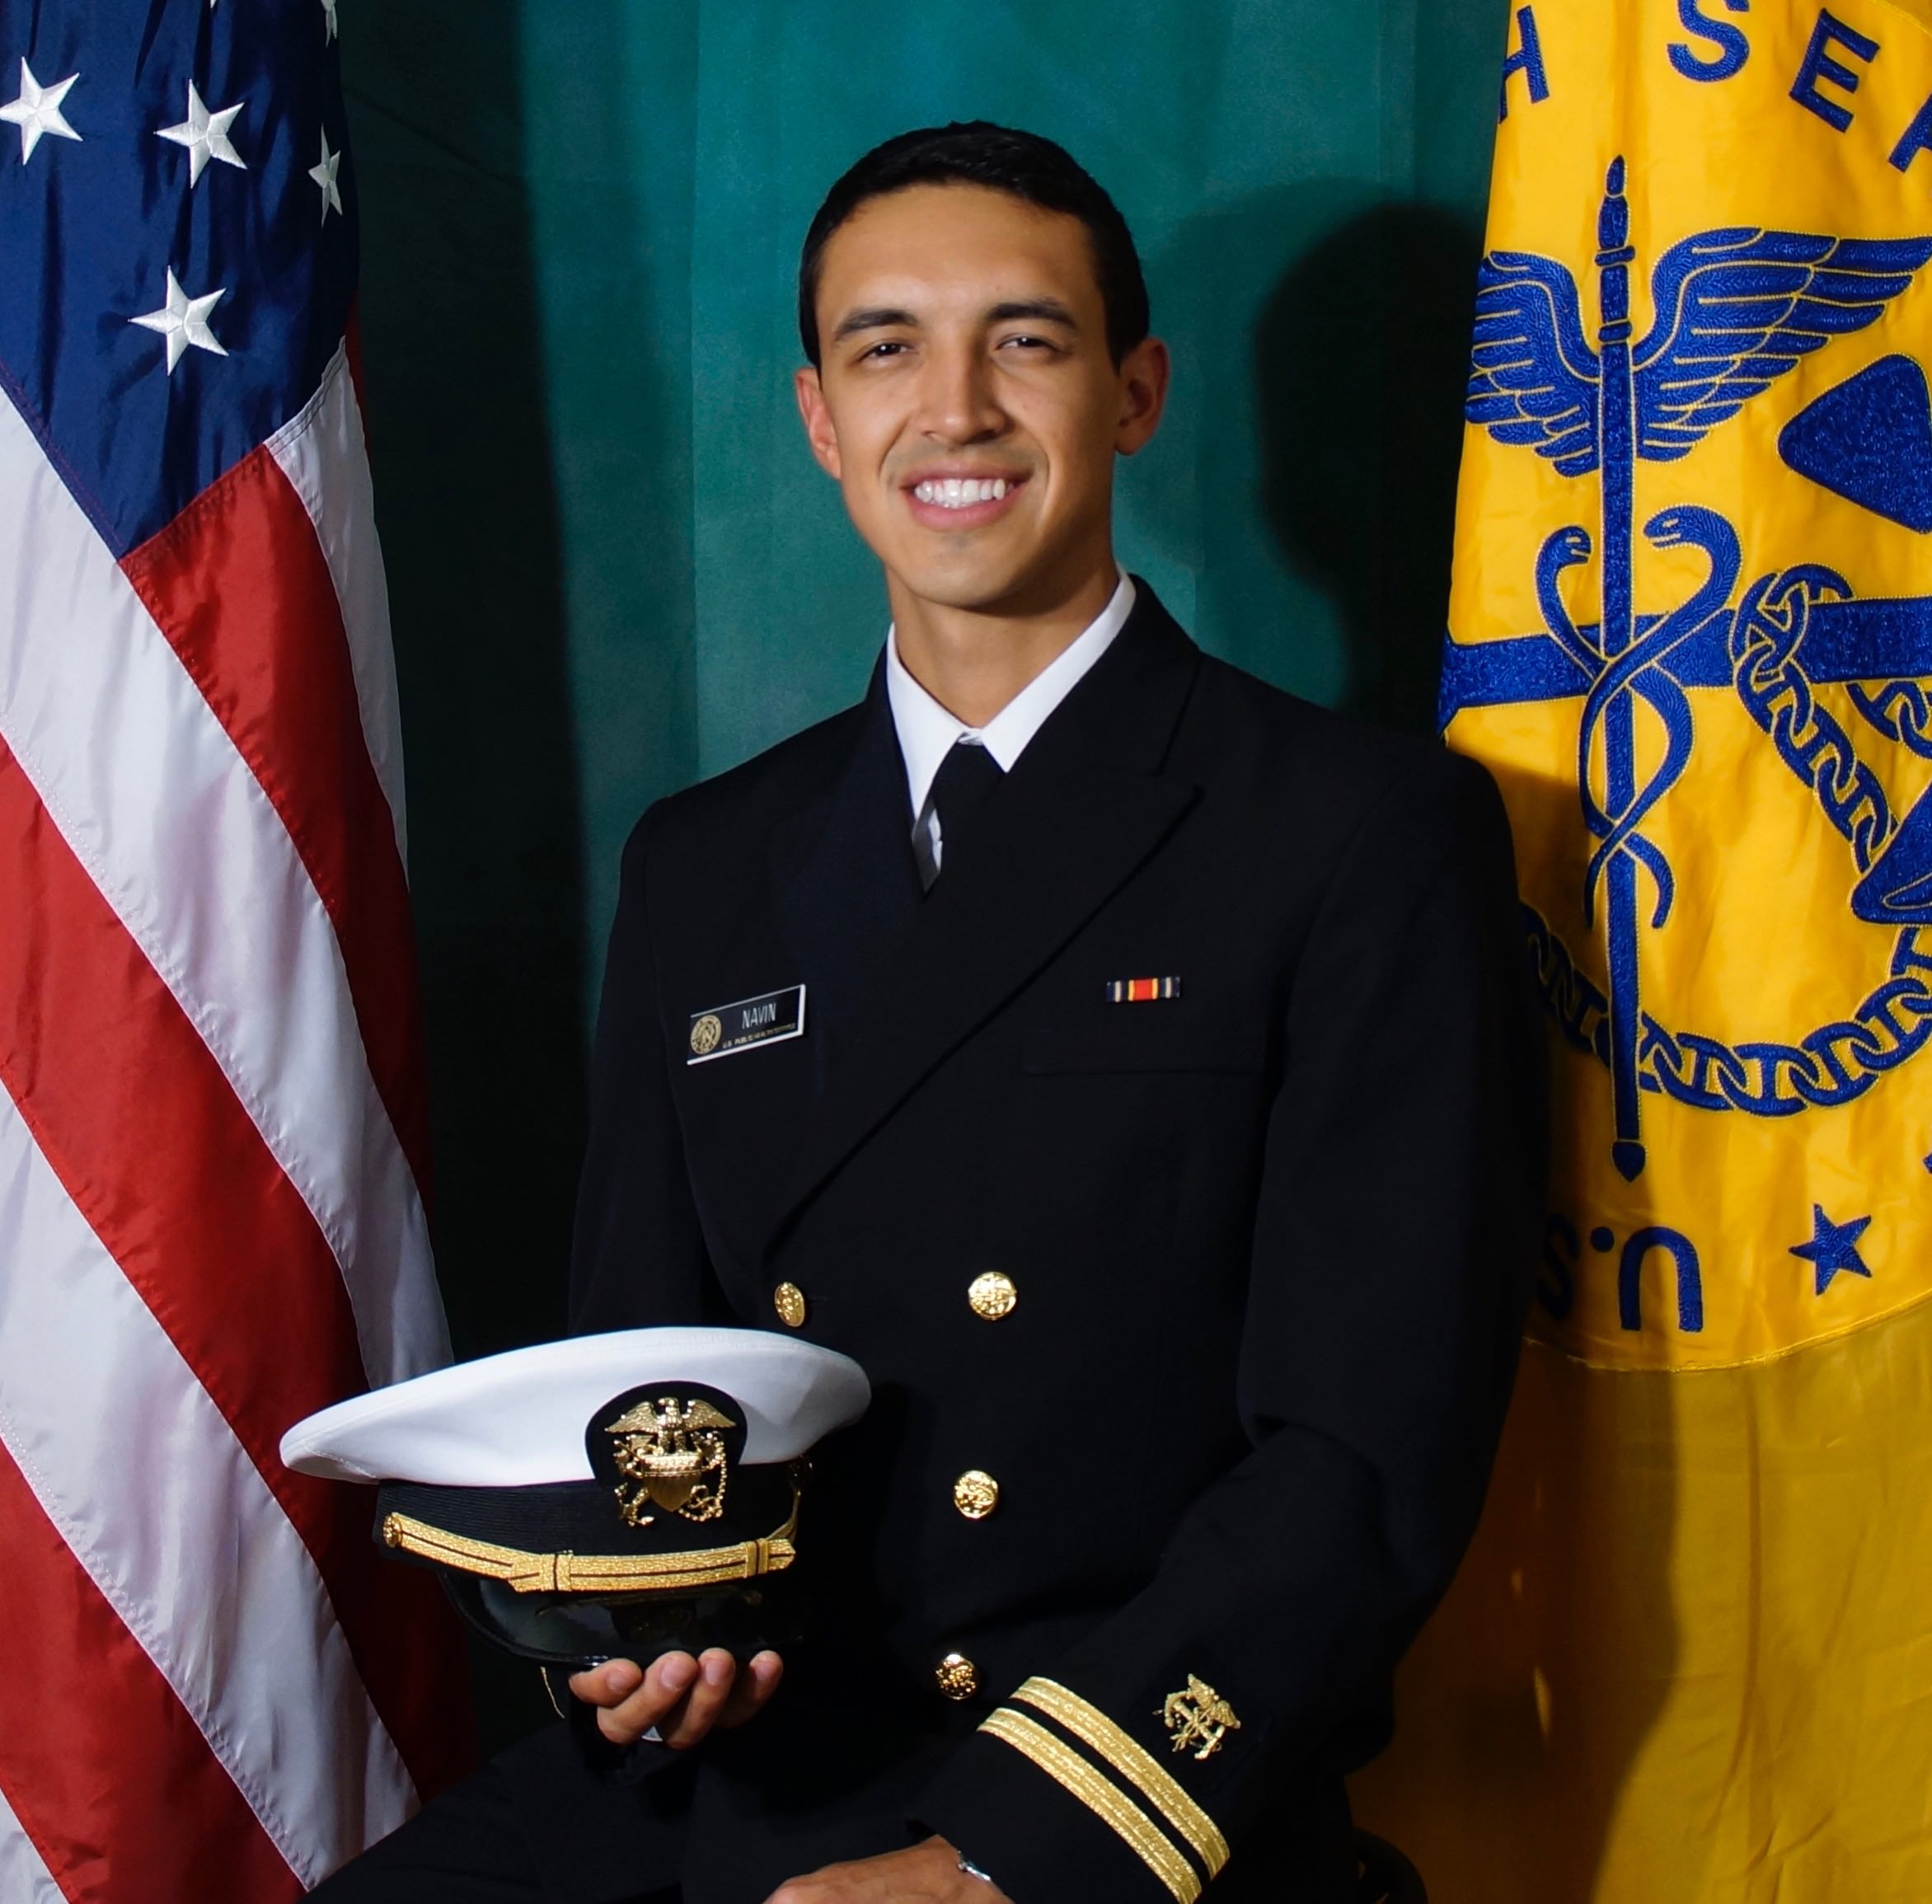 Lt. Sean Navin '10 Pharm.D. is a pharmicist with the U.S. Public Health Service Commissioned Corps